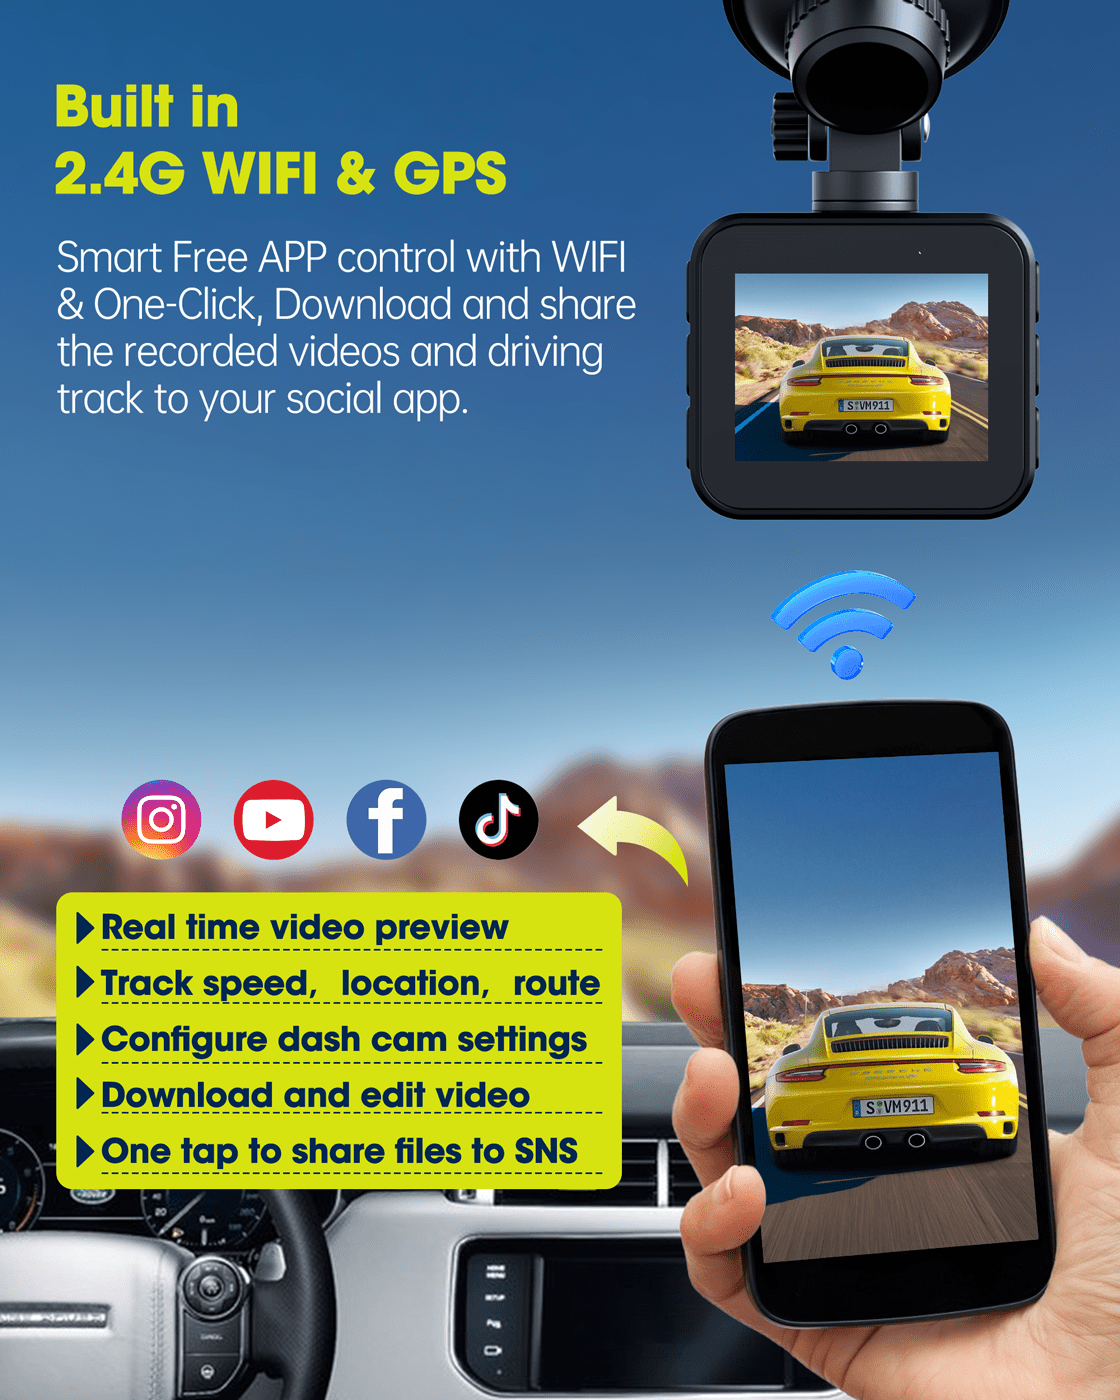 UHD 4K Dash Cam with Built-in WiFi GPS Super Night Vision, TOGUARD Voice  Control Car Camera Front Camera for Car 